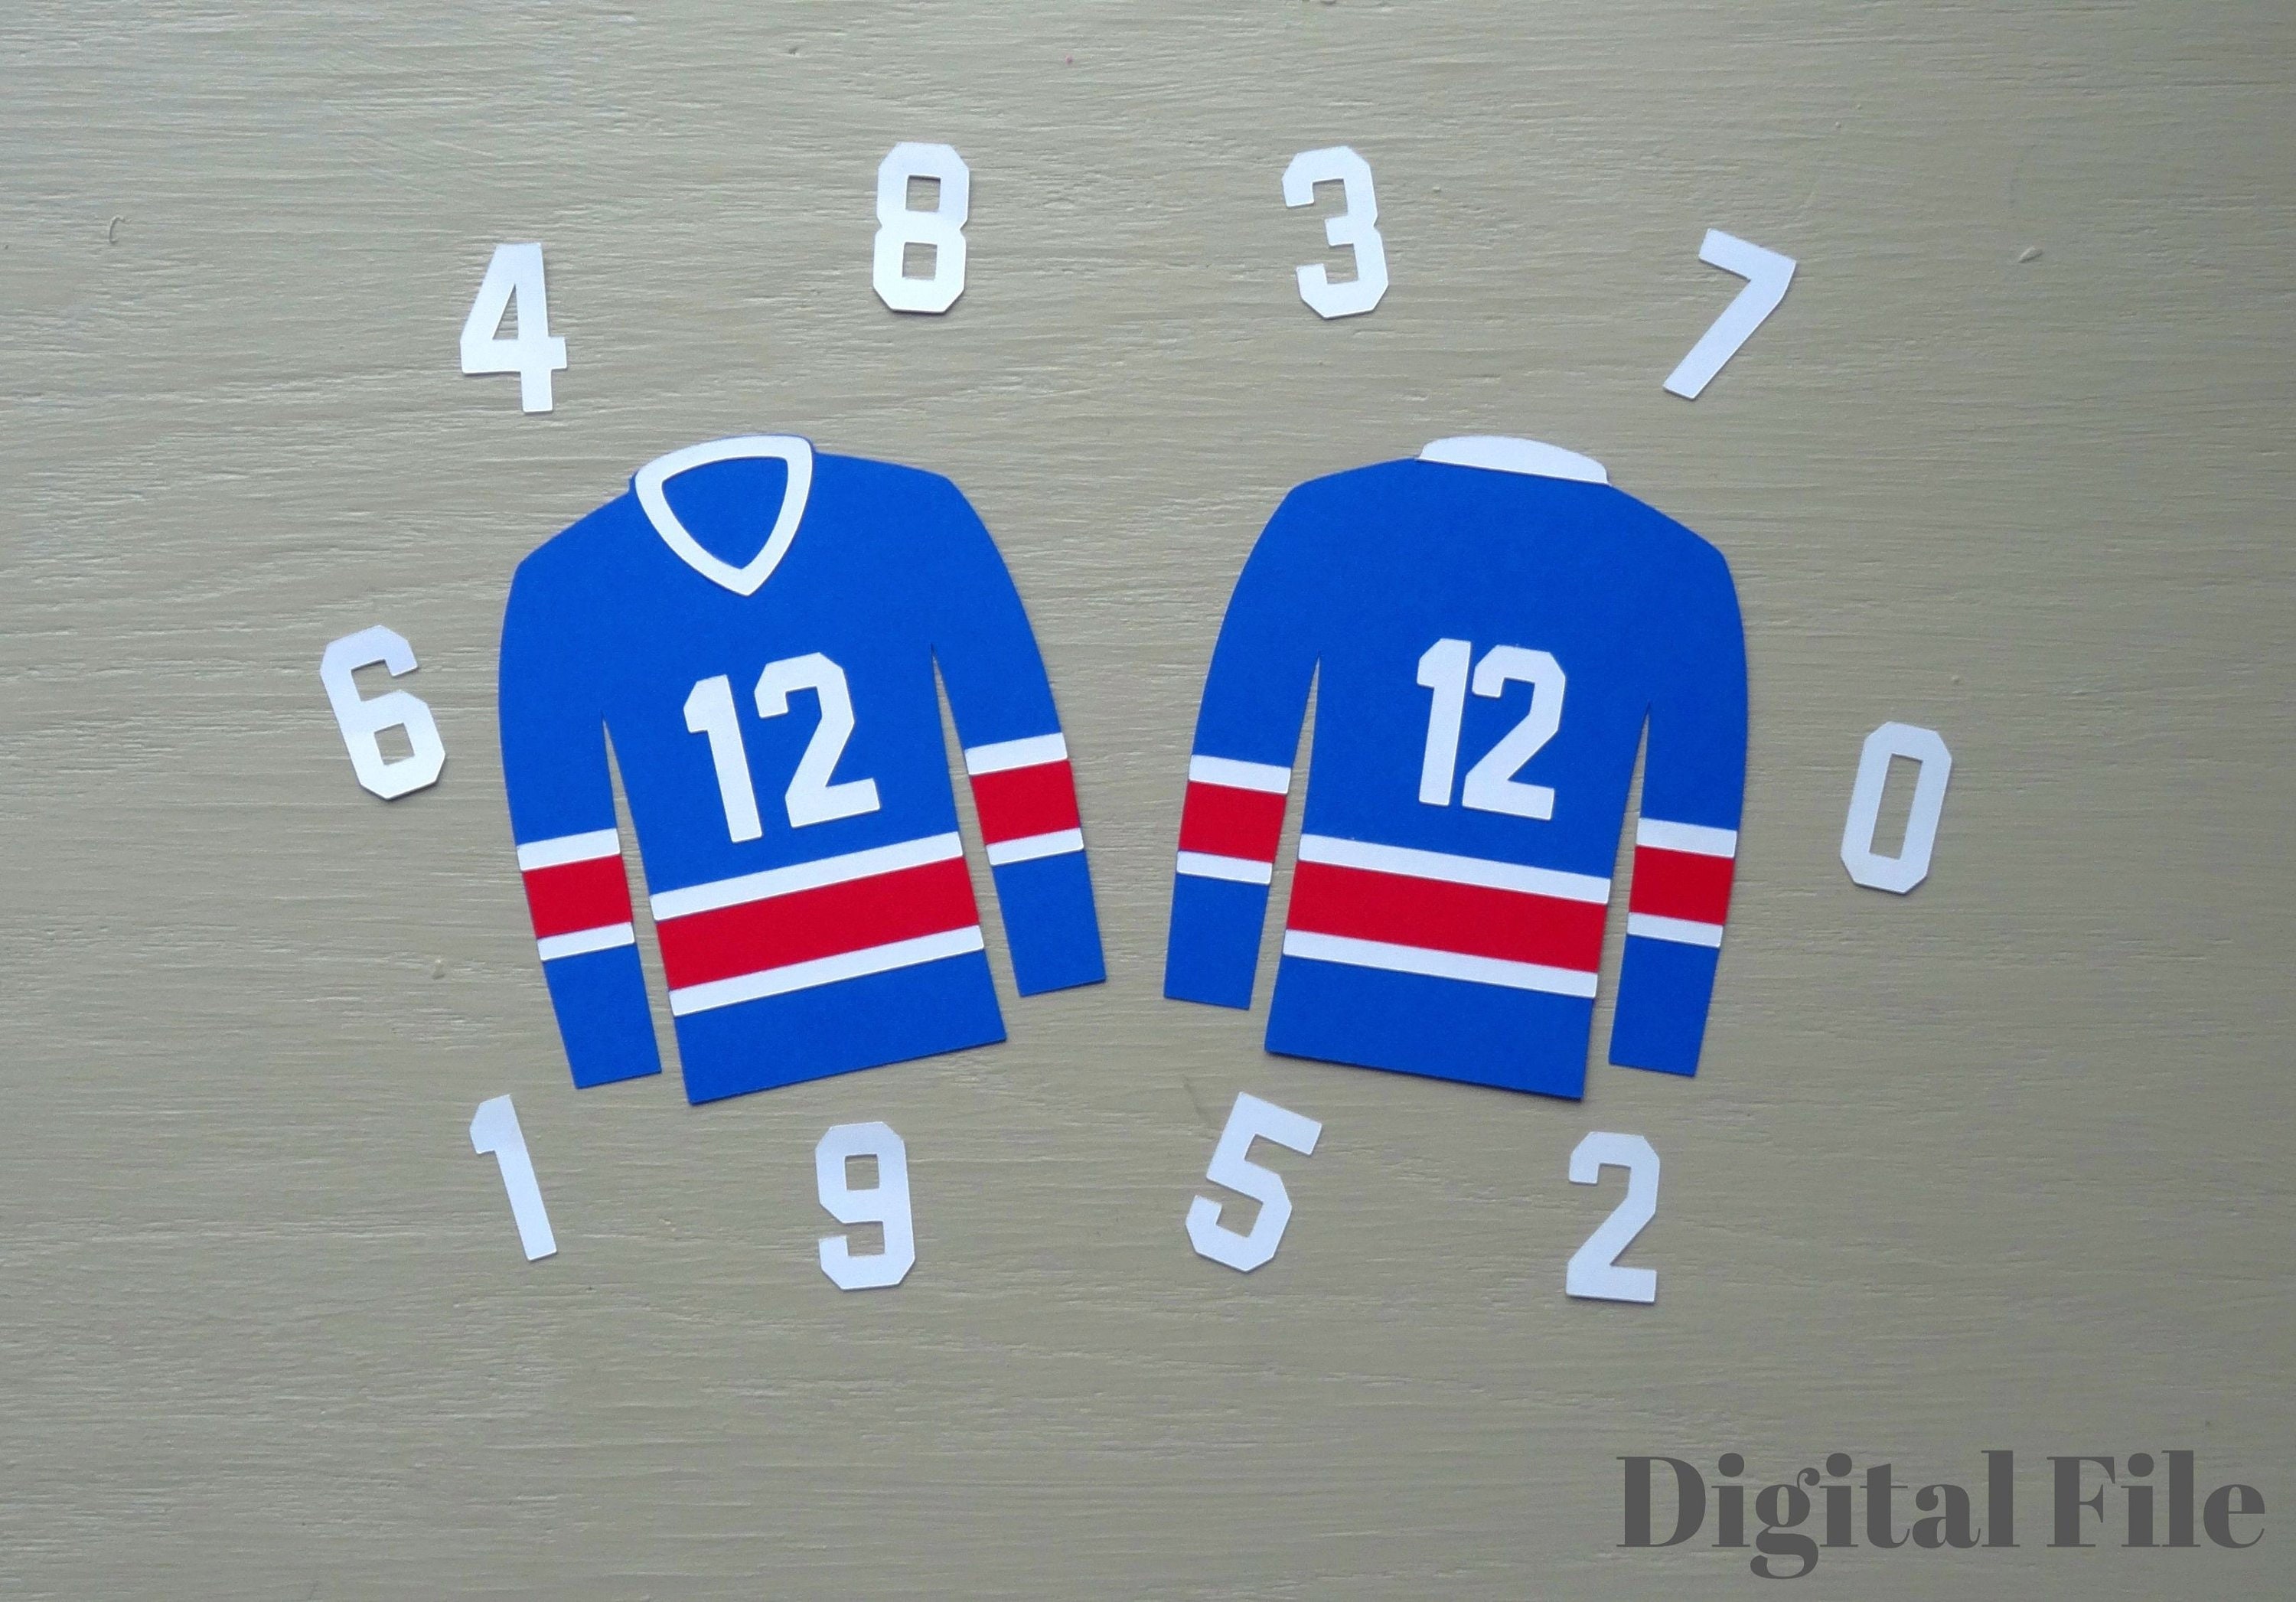 Hockey Jersey With Laces SVG Files – Created To Sew